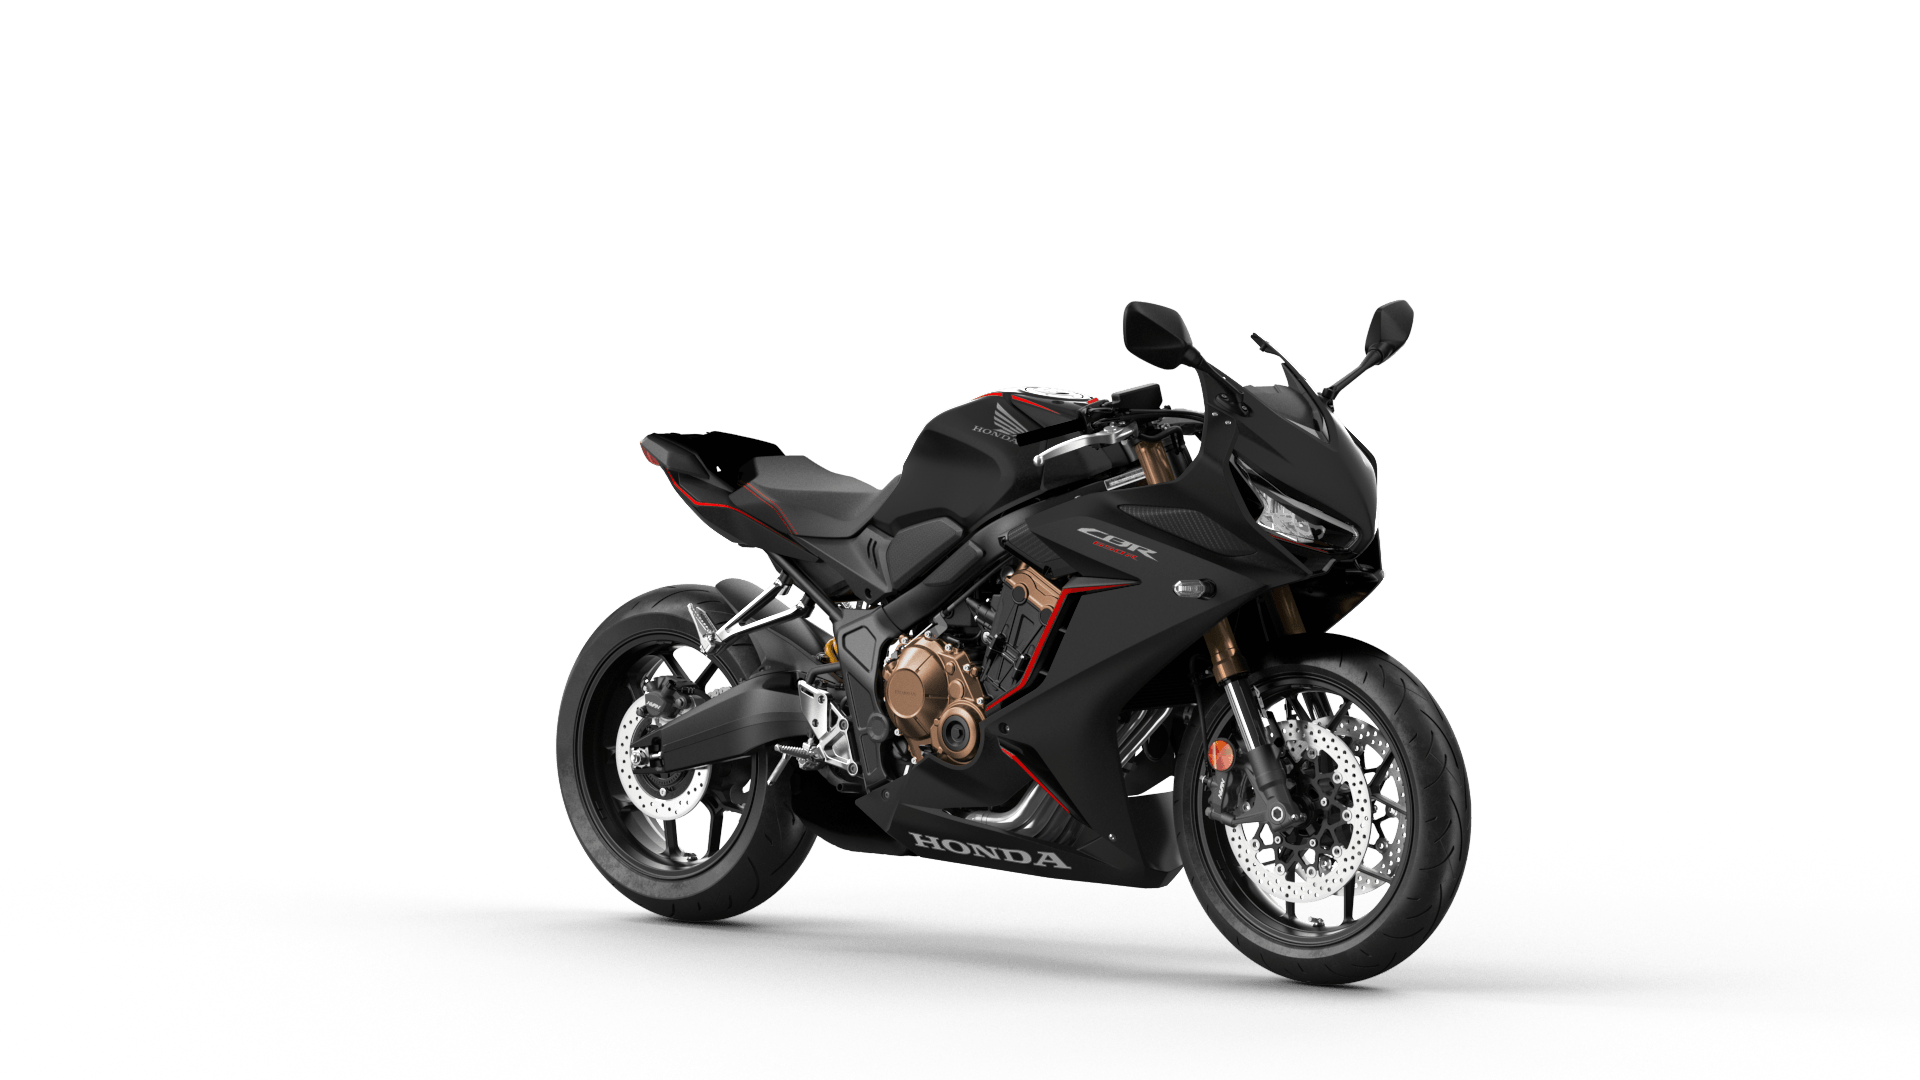 Red motorcycle Honda CBR 650 RR, 2021 on a gray background Desktop  wallpapers 1400x1050